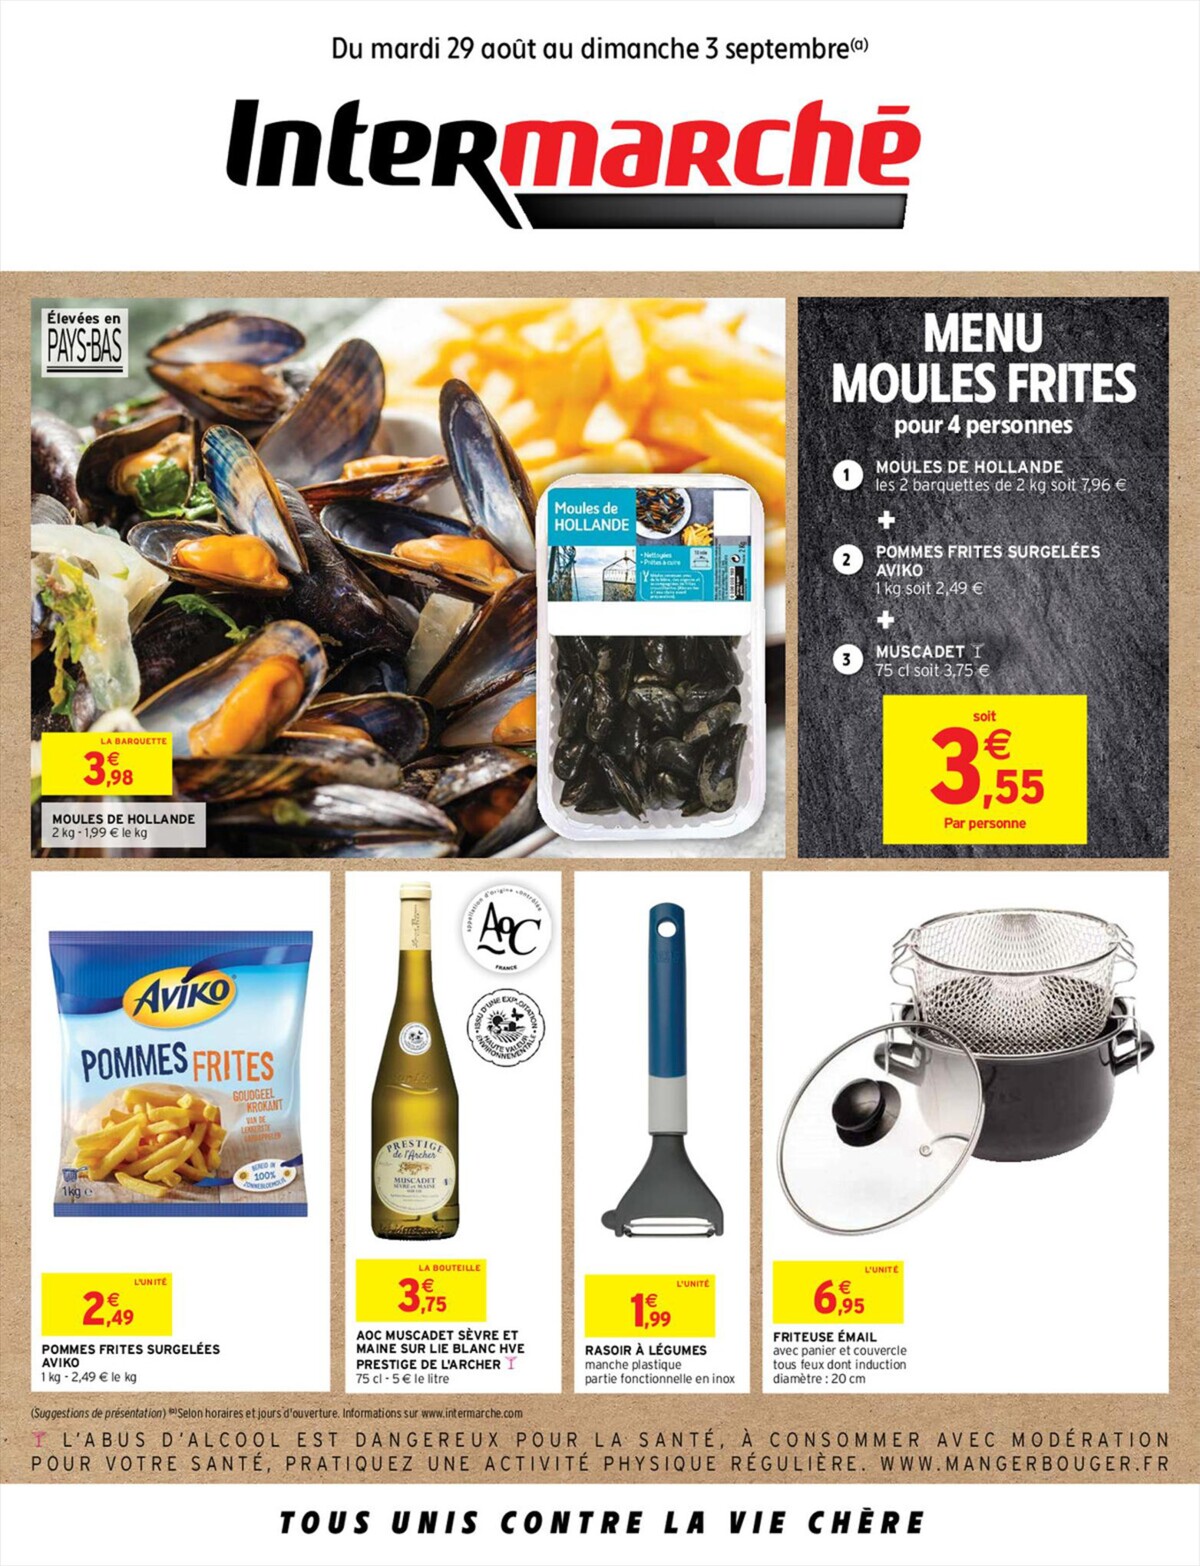 Catalogue S35 - R2 - MOULES FRITES, page 00001